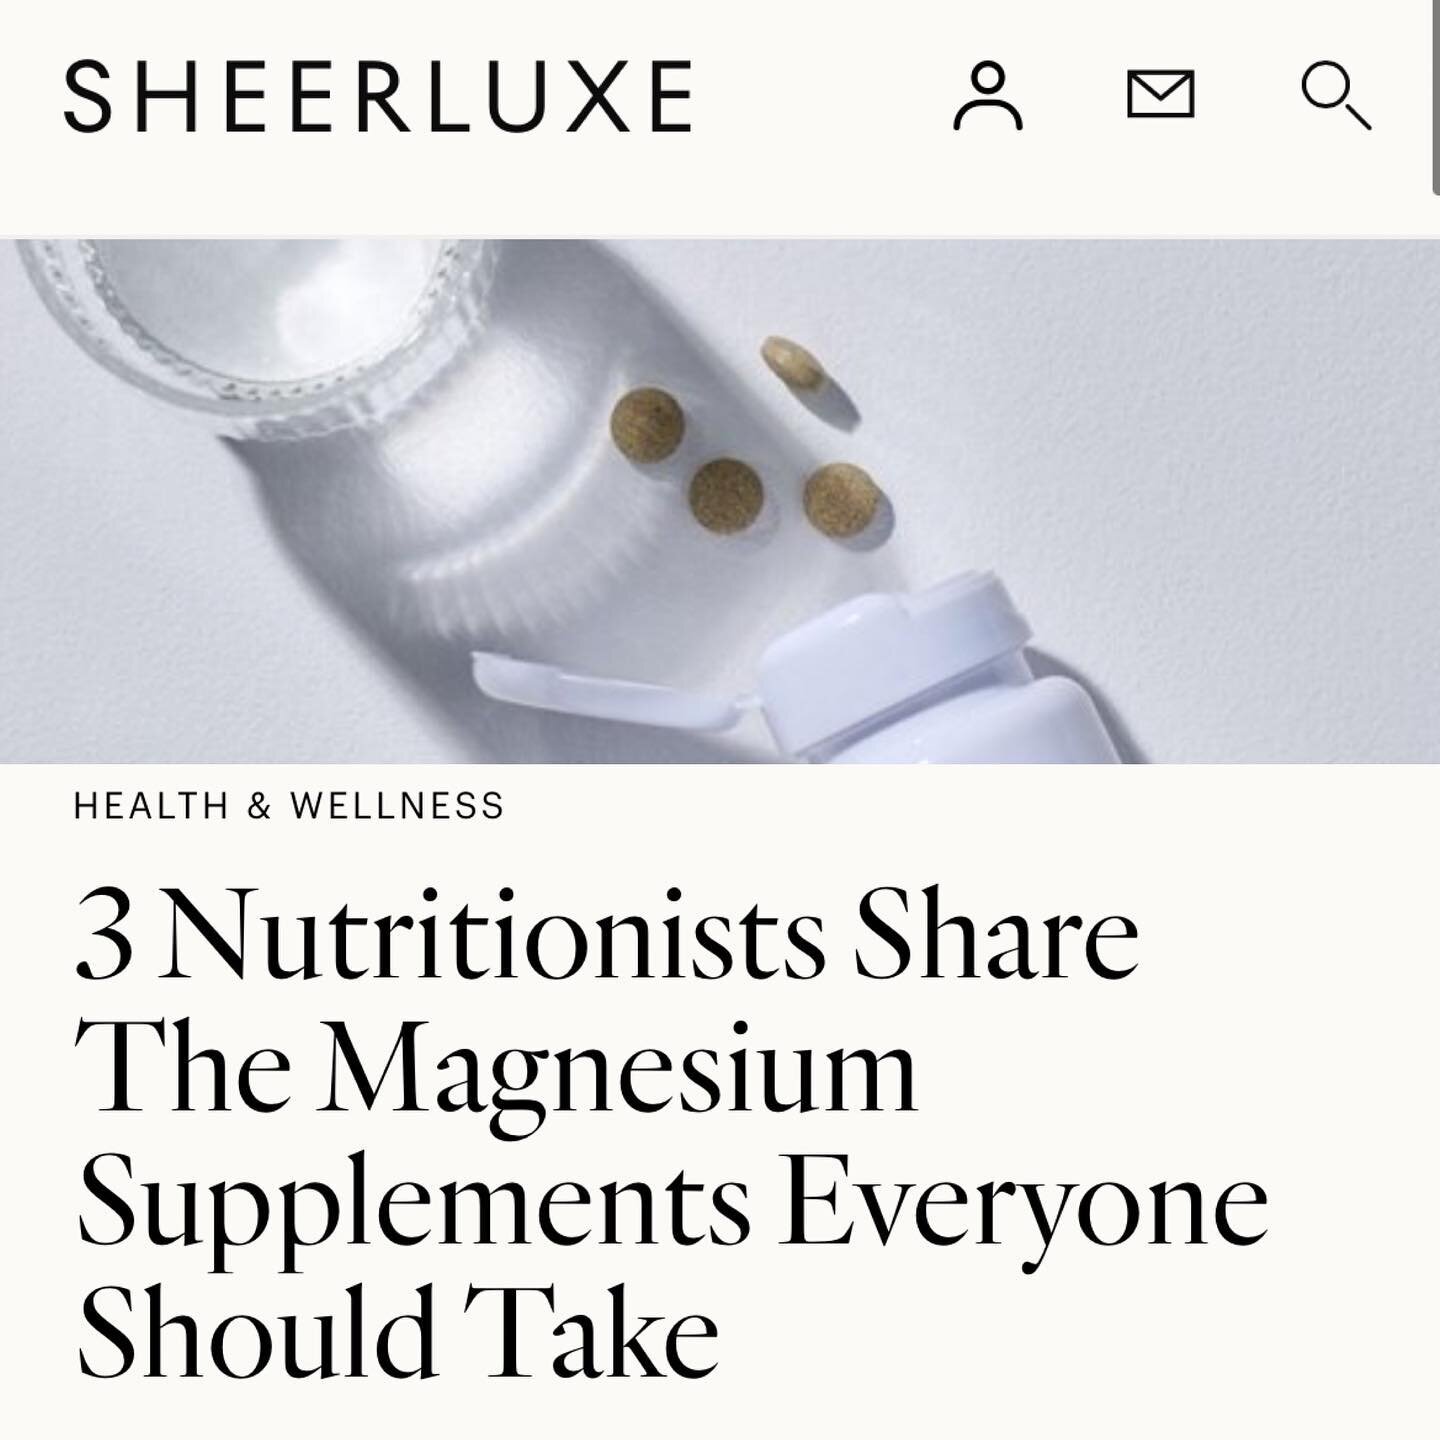 Magnesium is an absolute superhero mineral that you NEED to know about! Learn more about how magnesium can support your health &amp; well-being in this informative @sheerluxe article 👆🏻thank you so much for including my comments @toralicewest 🤍

#